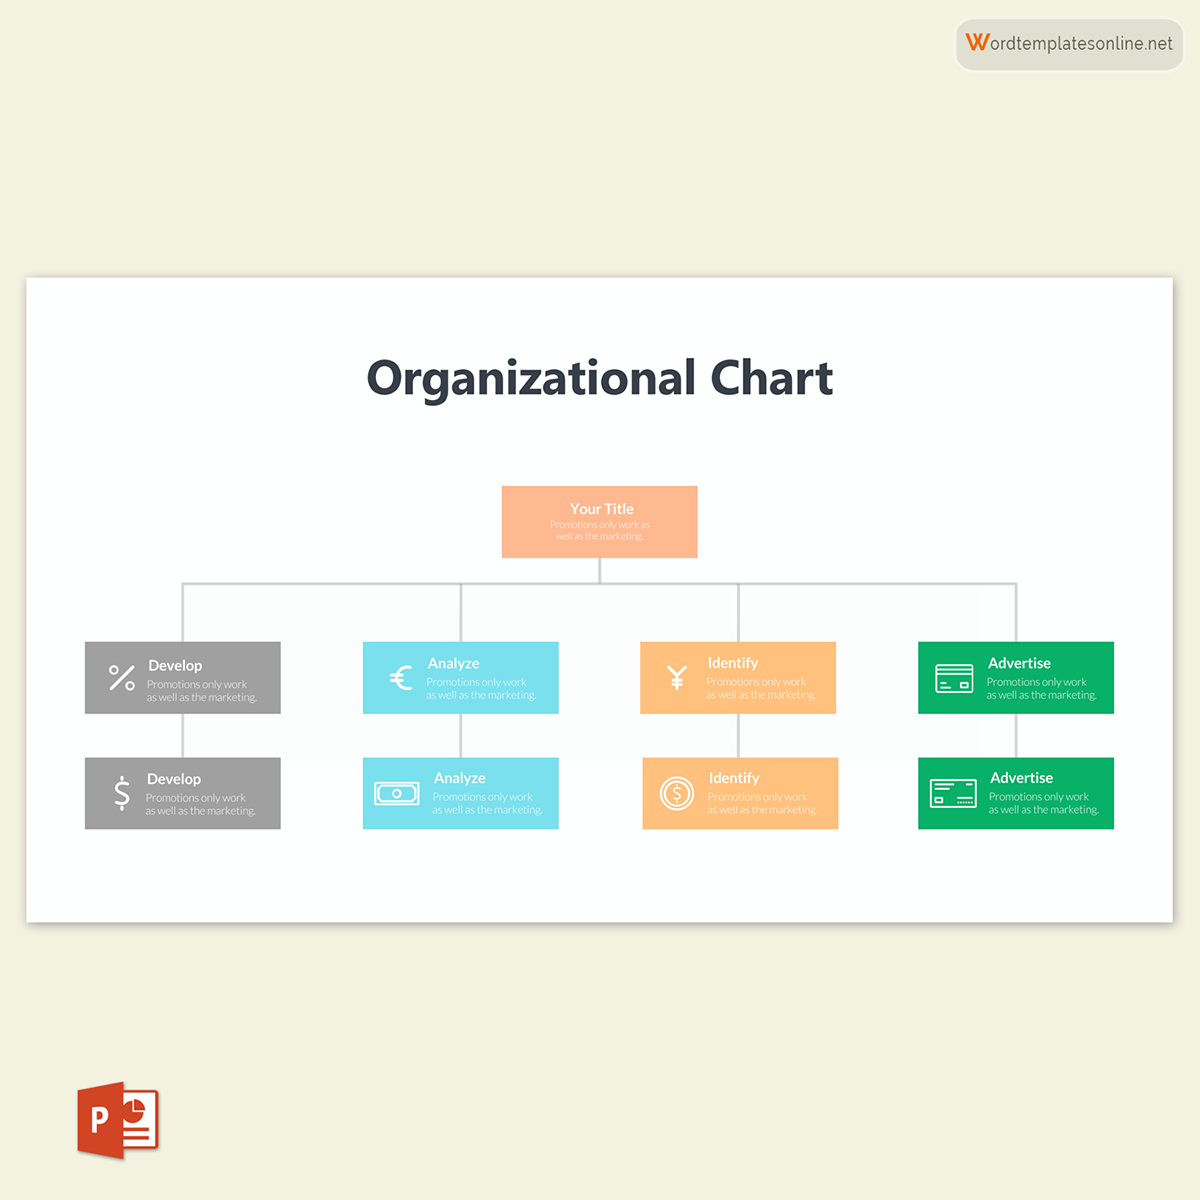 Excel-based Organizational Chart Template